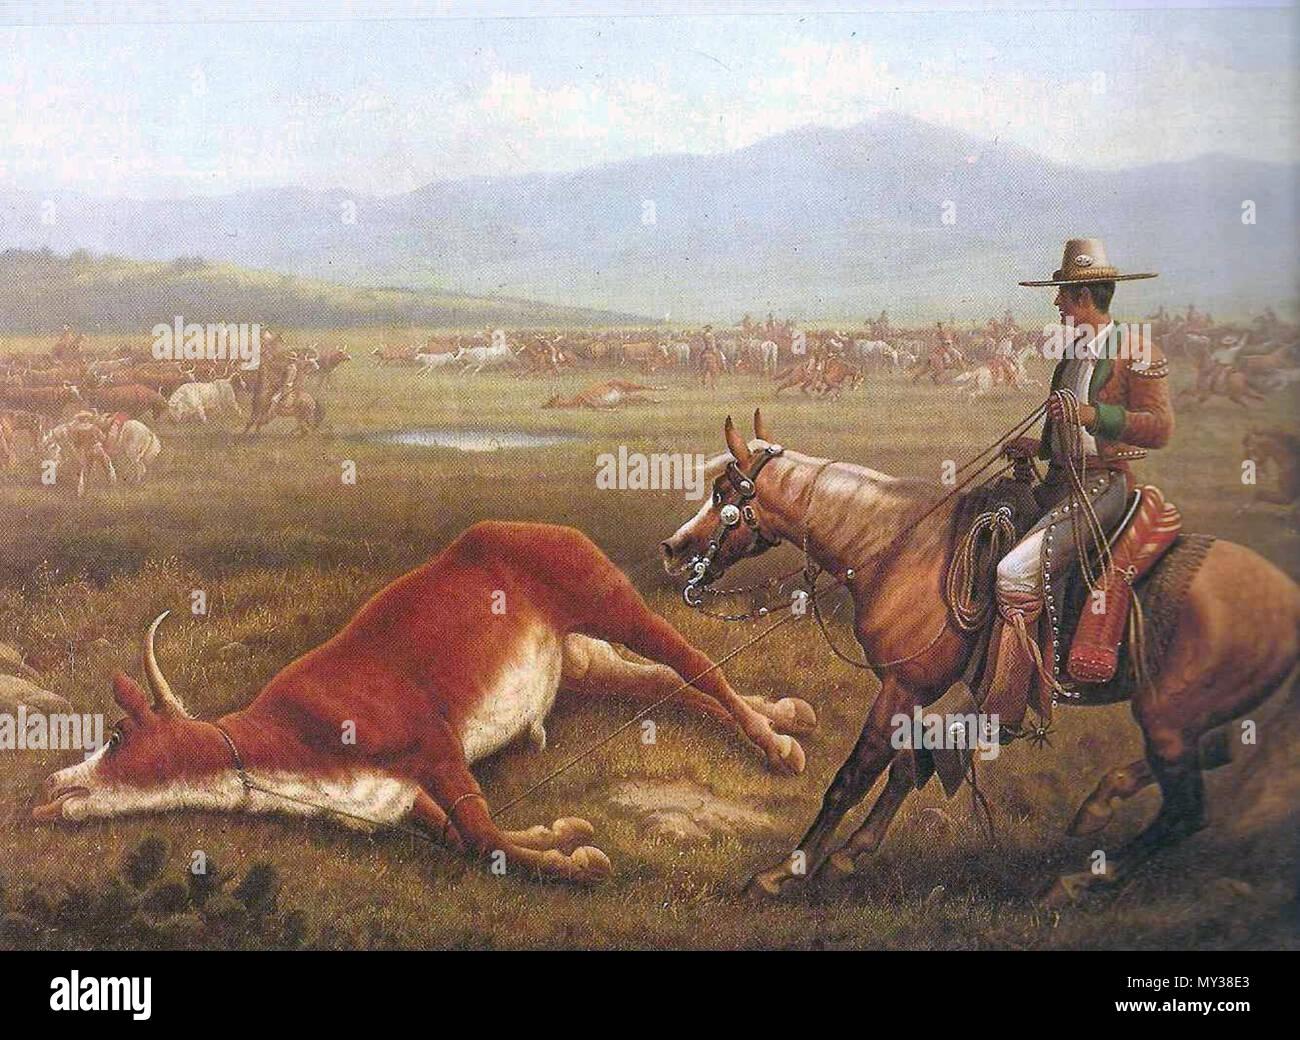 . English: Painting of a Vaquero in action roping cattle during 1830s Spanish California. 1830s. Time Life Books 545 Vaqueros Stock Photo